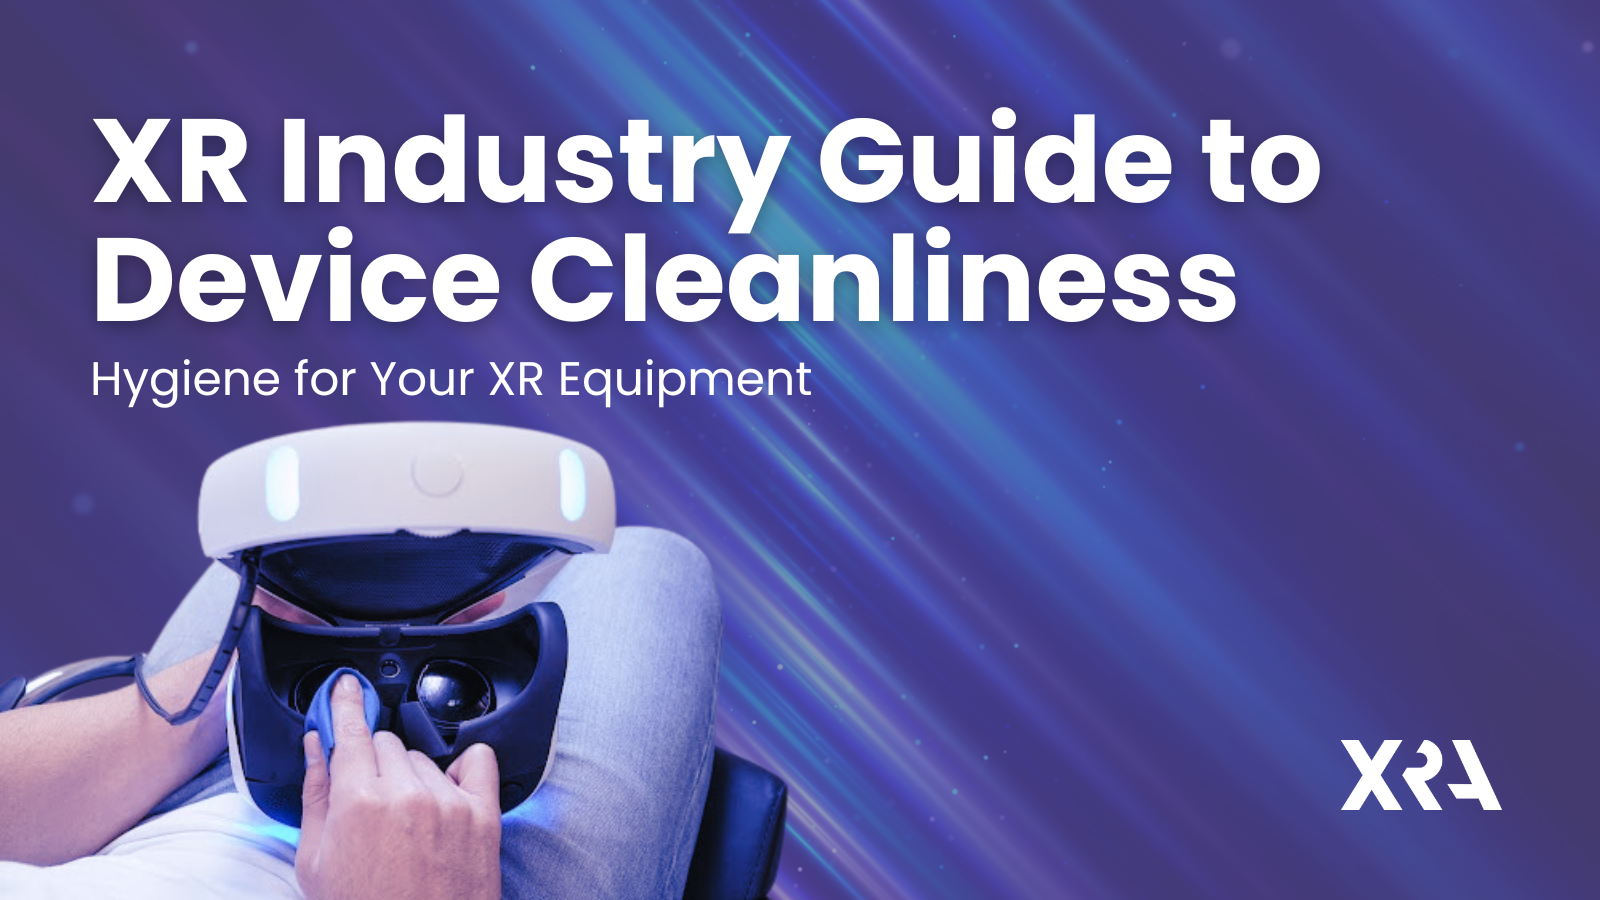 XRA PUBLISHES “XR INDUSTRY GUIDE TO DEVICE CLEANLINESS: HYGIENE FOR YOUR XR EQUIPMENT”